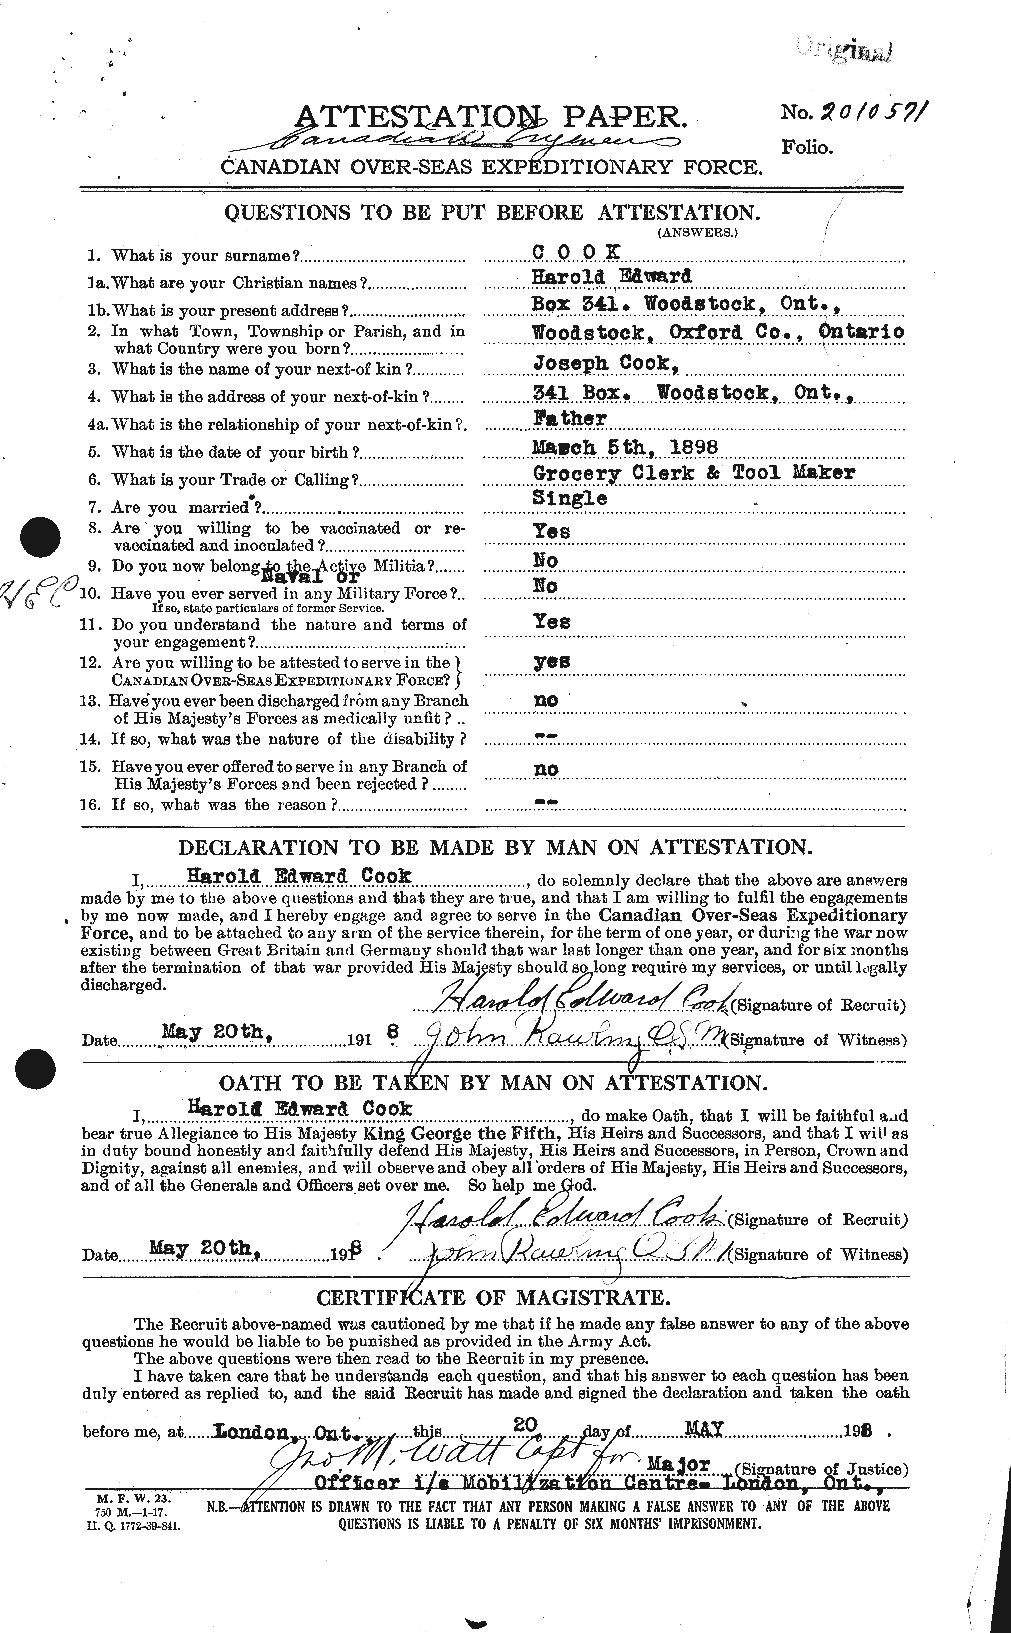 Personnel Records of the First World War - CEF 073772a